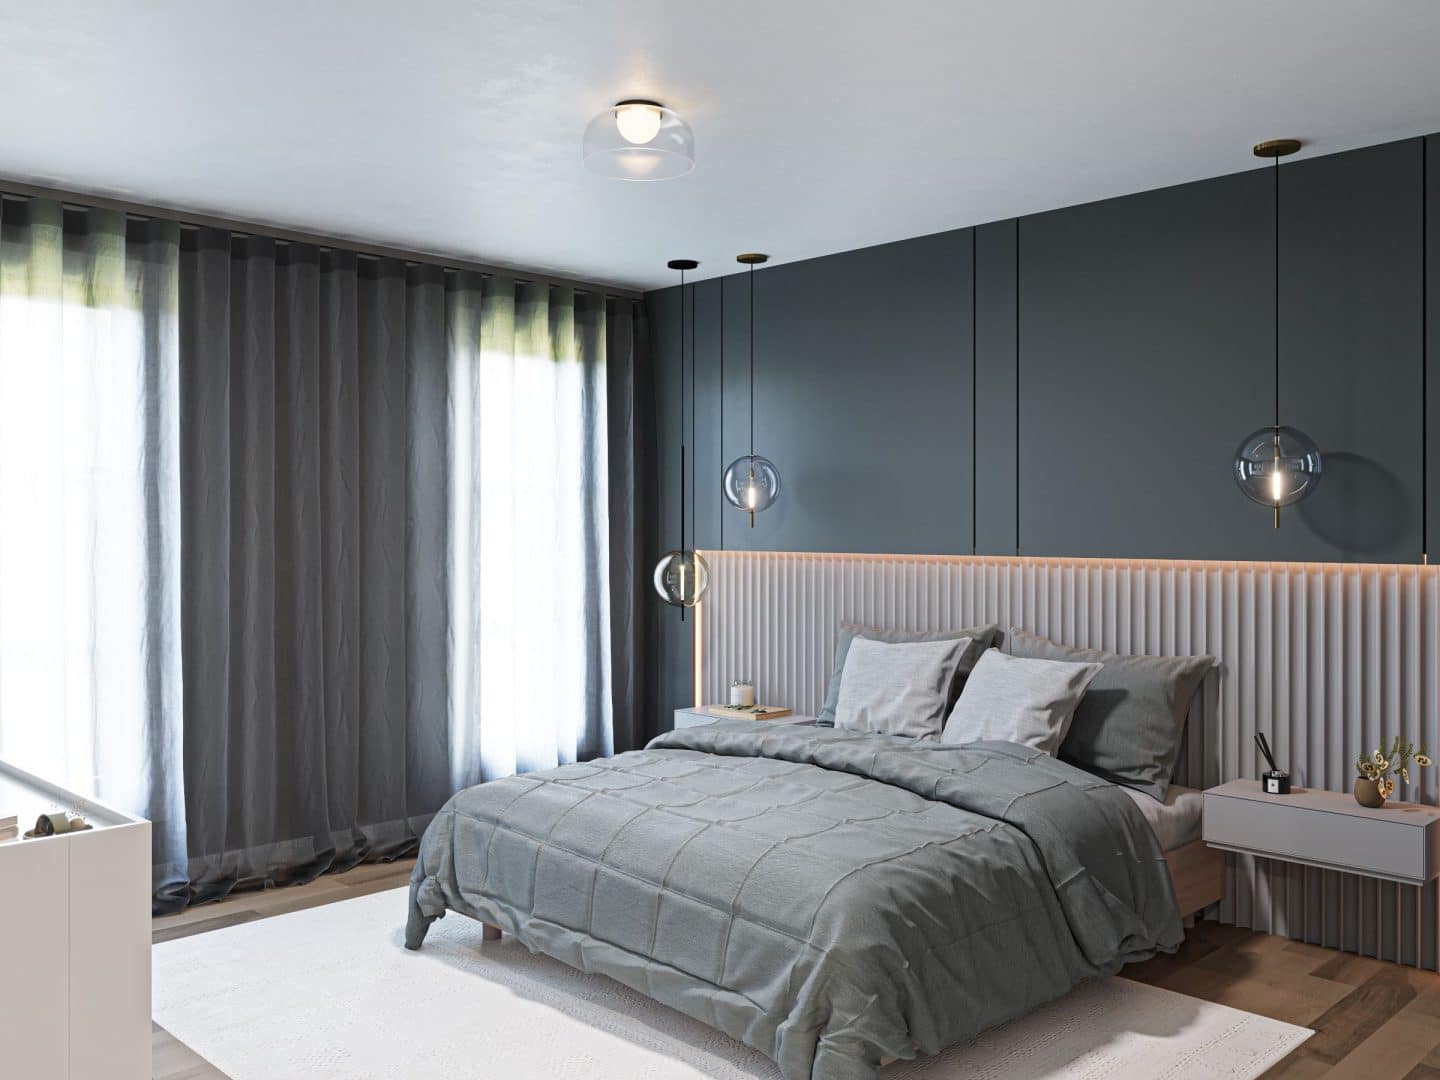 The Citana model is a contemporary single-storey home. View of the master bedroom.